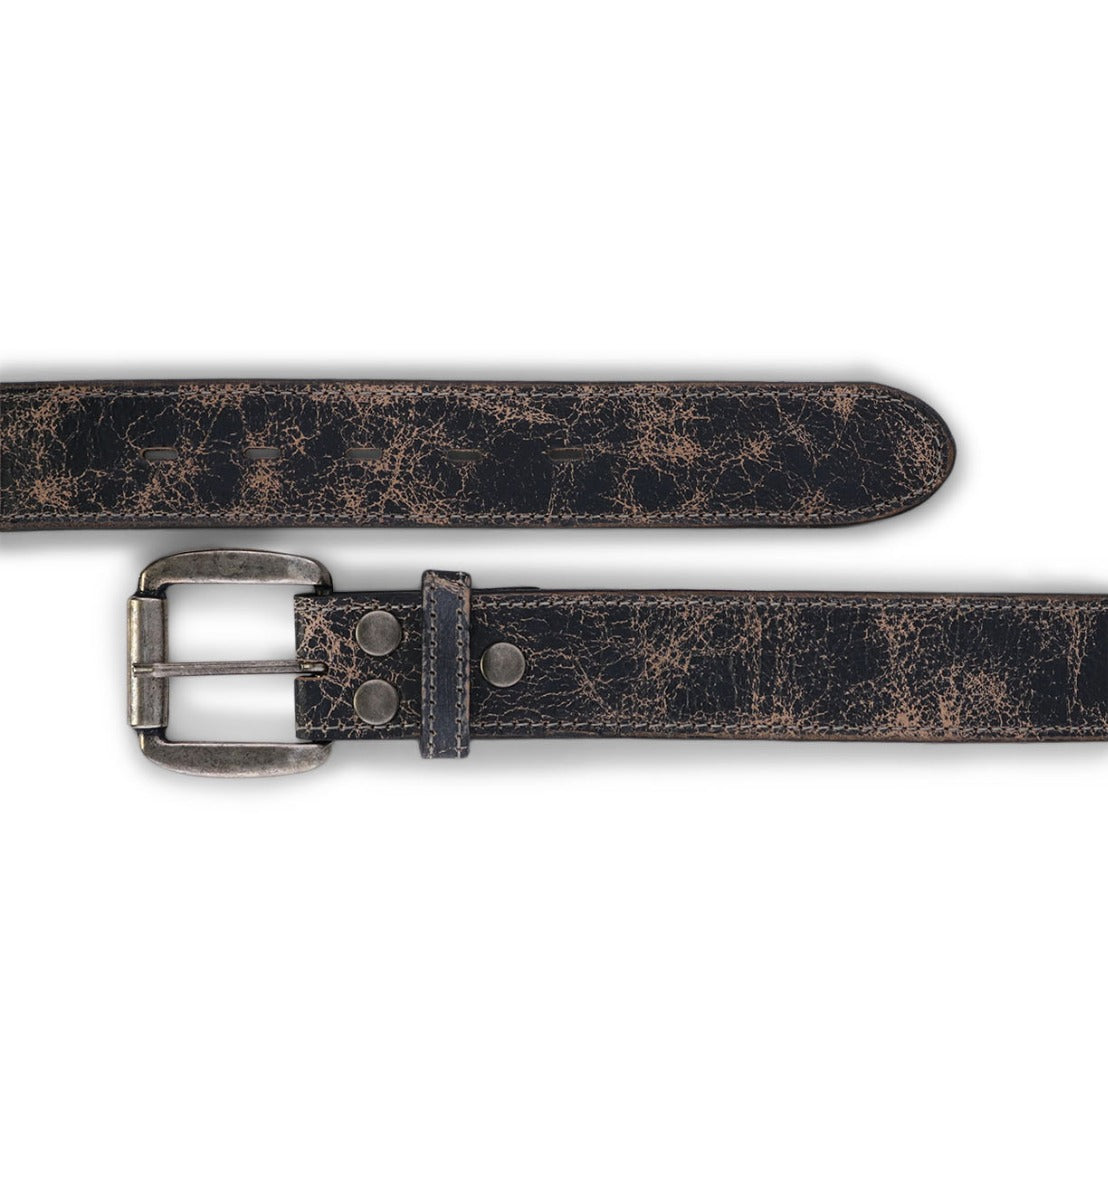 A Meander black leather belt with a silver buckle, by Bed Stu.